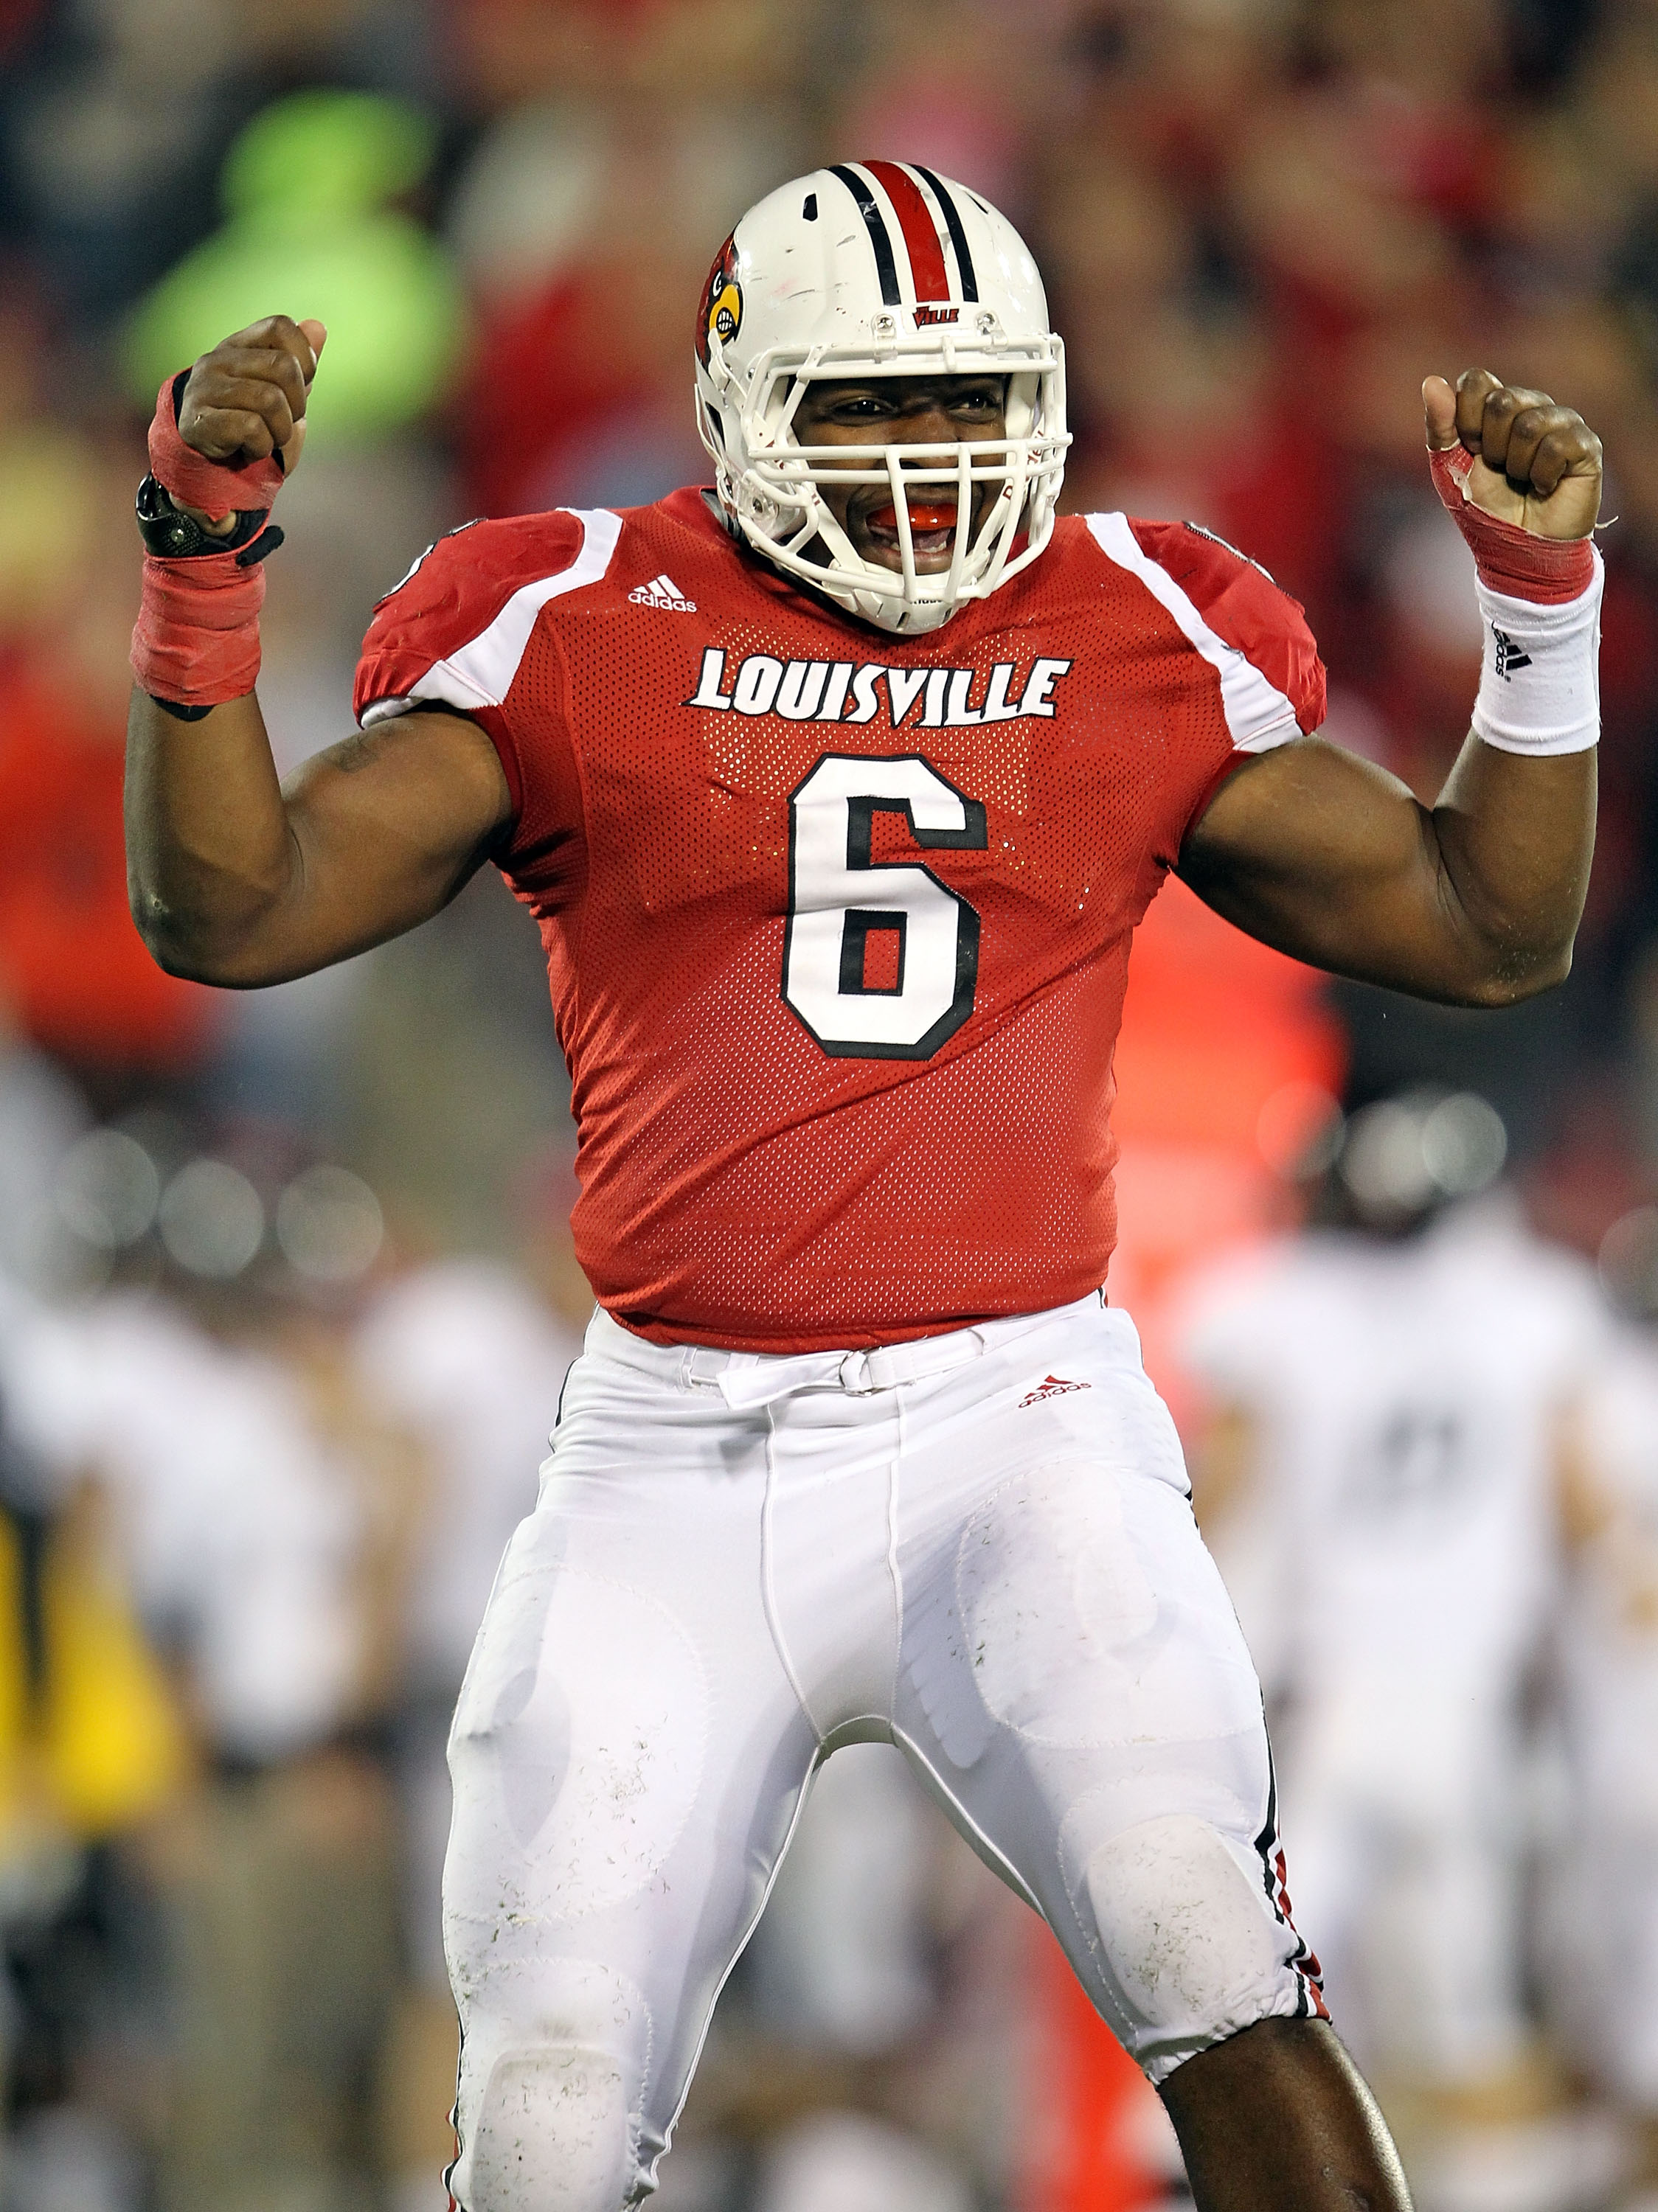 LOUISVILLE, KY - OCTOBER 15:  Greg Scruggs #6 of  the Louisville Cardinals  celebrates after intercepting a pass during the Big East Conference game against the Cincinnati Bearcats at Papa John's Cardinal Stadium on October 15, 2010 in Louisville, Kentuck